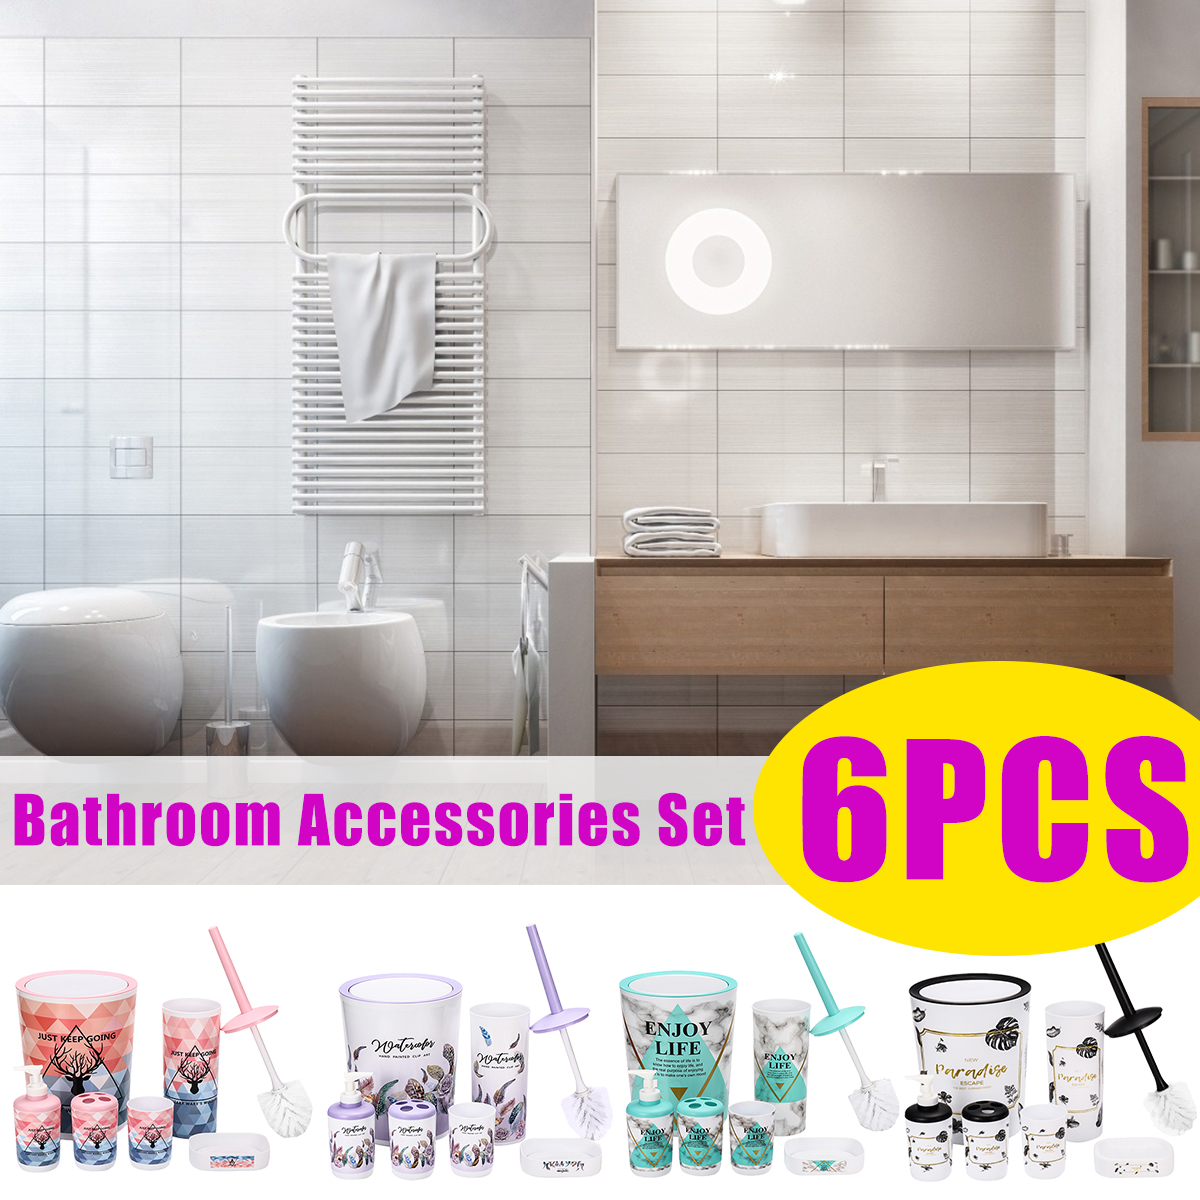 6Pcs-Toiletries-Bathroom-Set-Cup-Toothbrush-Holder-Soap-Dispenser-Tray-for-Bathroom-Decoration-Acces-1779029-1